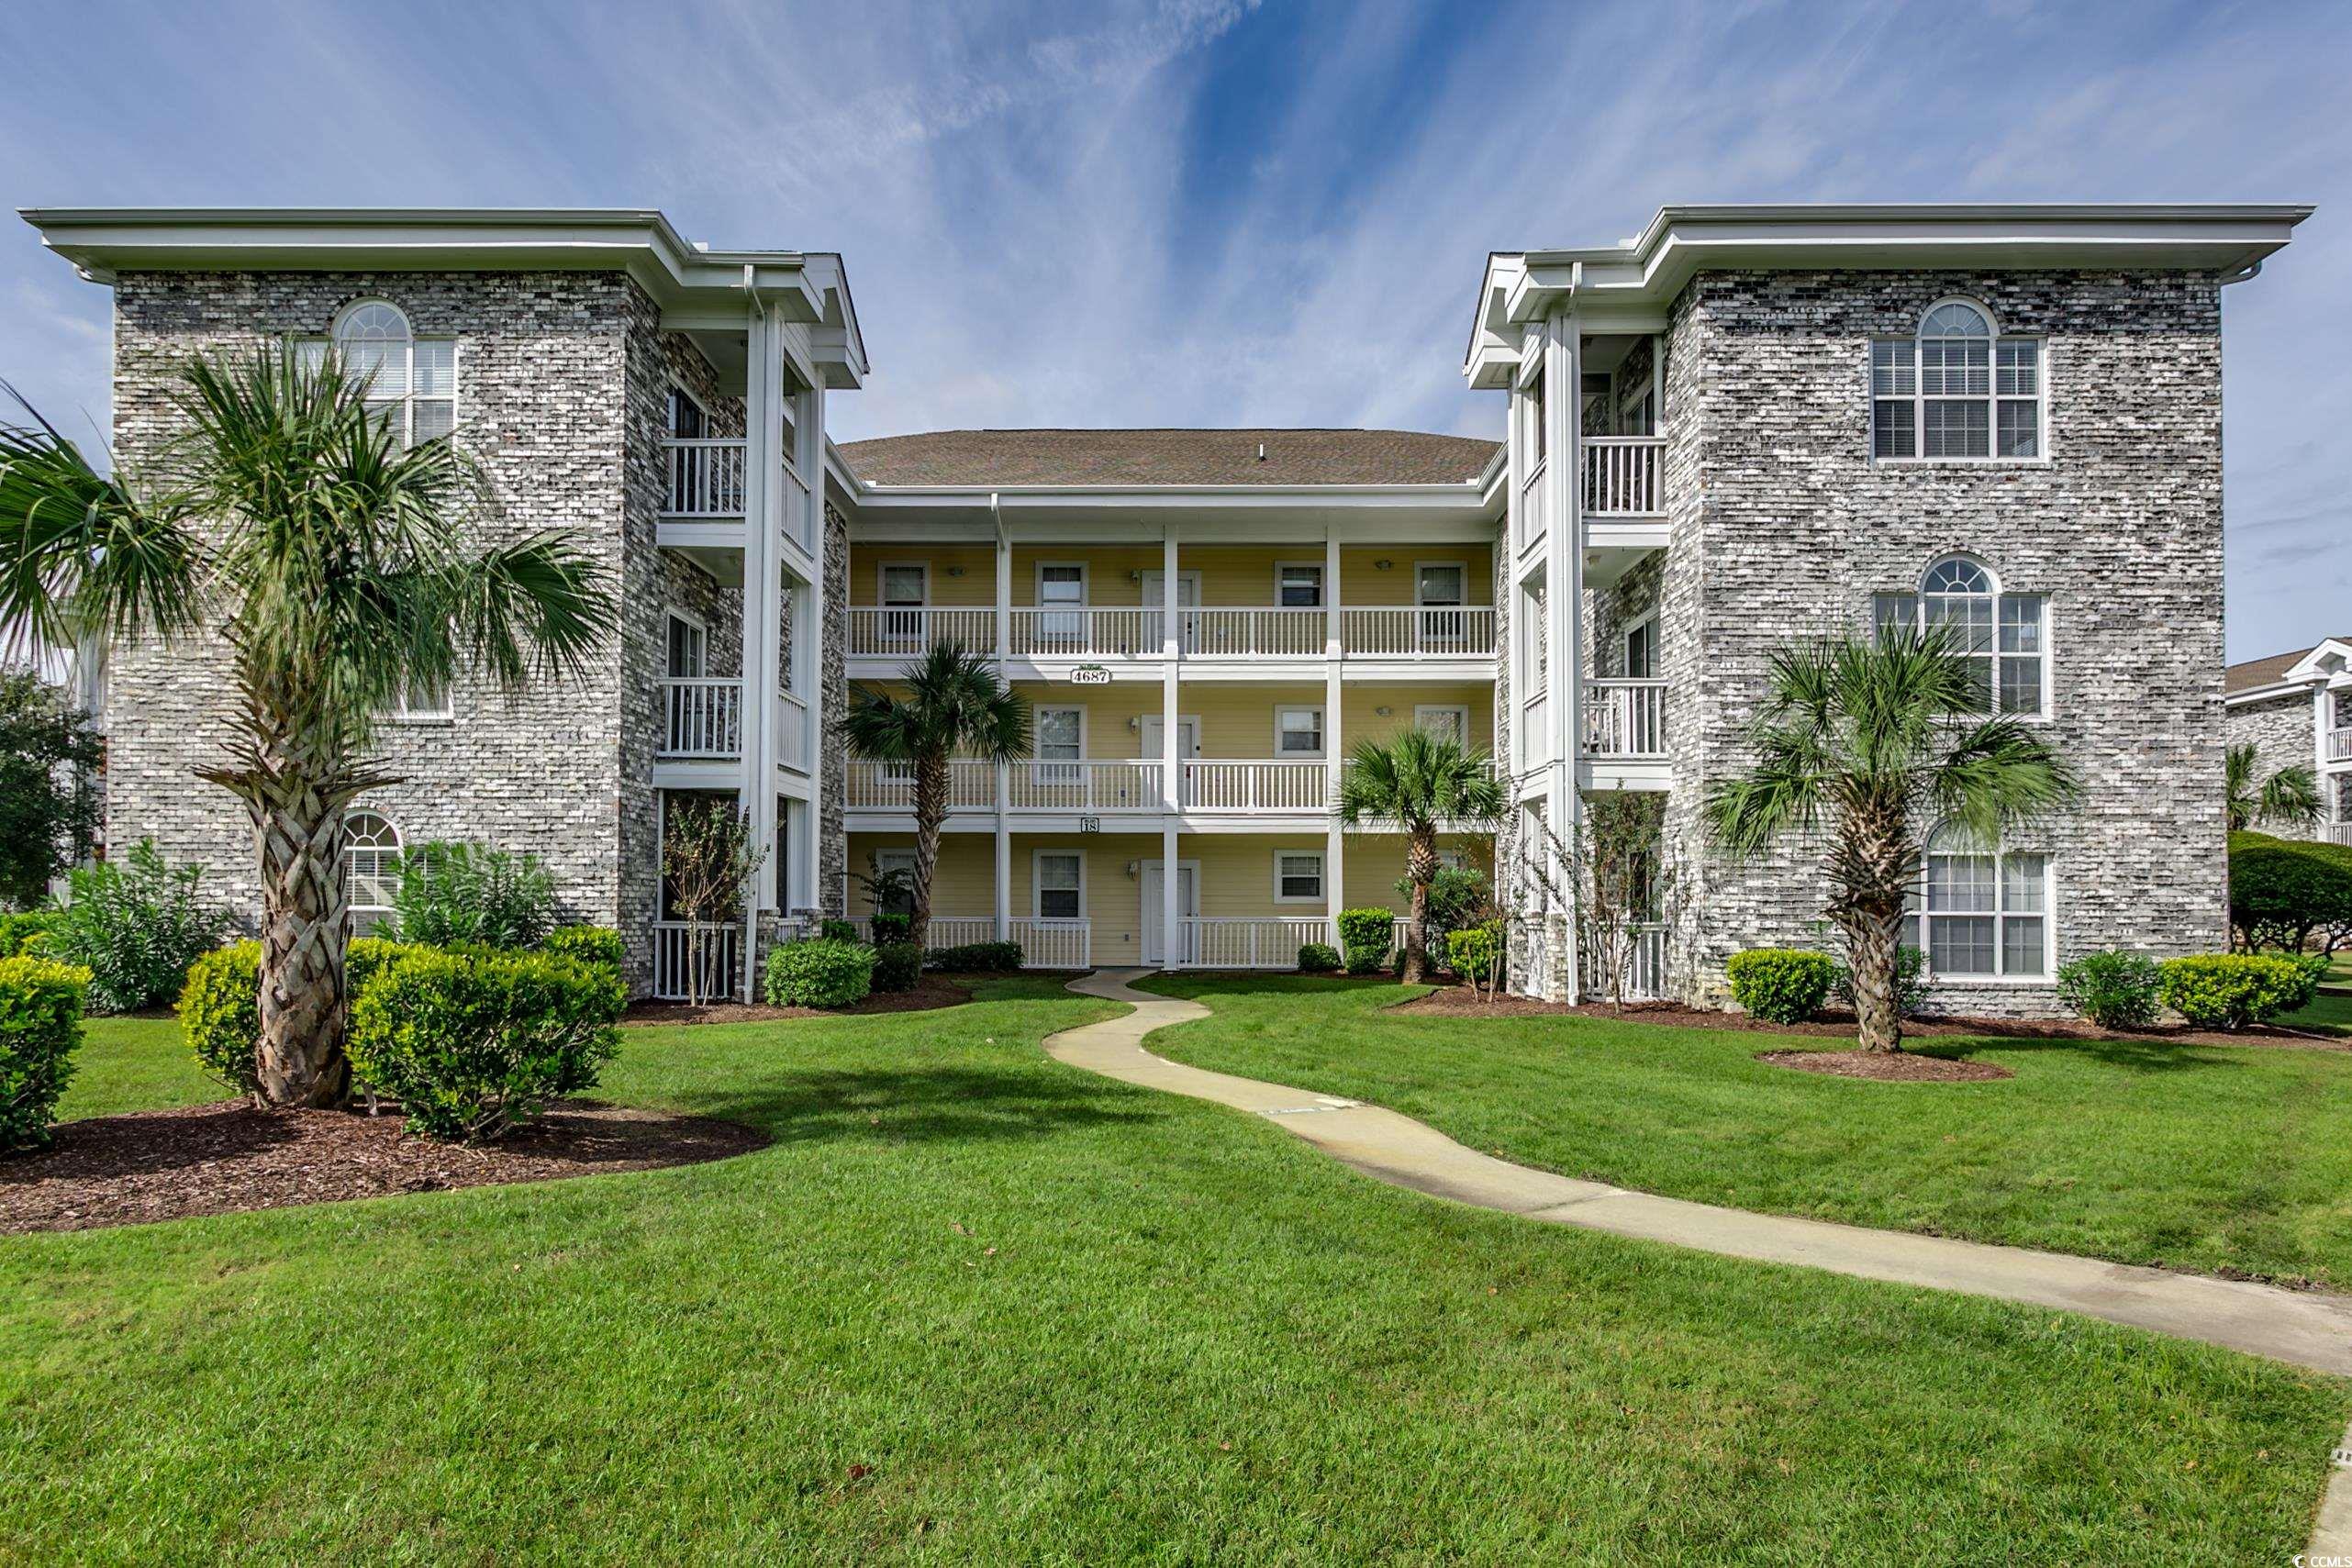 located in the highly desirable magnolia place community of myrtle beach, this beautifully decorated and fully furnished two bedroom/two bath condo offers the perfect blend of coastal and golf living.   stepping inside, you'll immediately notice the abundance of natural light that fills the open and airy living space. the stylish furnishings create a comfortable and inviting atmosphere, making this condo turnkey ready for you to move in and start enjoying all that myrtle beach has to offer.  the spacious living area is perfect for hosting gatherings with friends or simply relaxing after a day of exploring the area. the adjacent lanai provides a private retreat, where you can sip your morning coffee or enjoy a glass of wine in the evening breeze.  additionally, this condo comes with an outside storage space, perfect for storing beach gear, golf clubs, and other essentials. from your unit, you'll have a wonderful view of the community pool, with the golf course just beyond.   not only is this property an ideal residence, it also offers versatile investment potential. short-term rentals are allowed, making it an excellent vacation property or income-generating asset.   don't miss out on the opportunity to own this charming and conveniently located condo in myrtle beach.  schedule your viewing today!